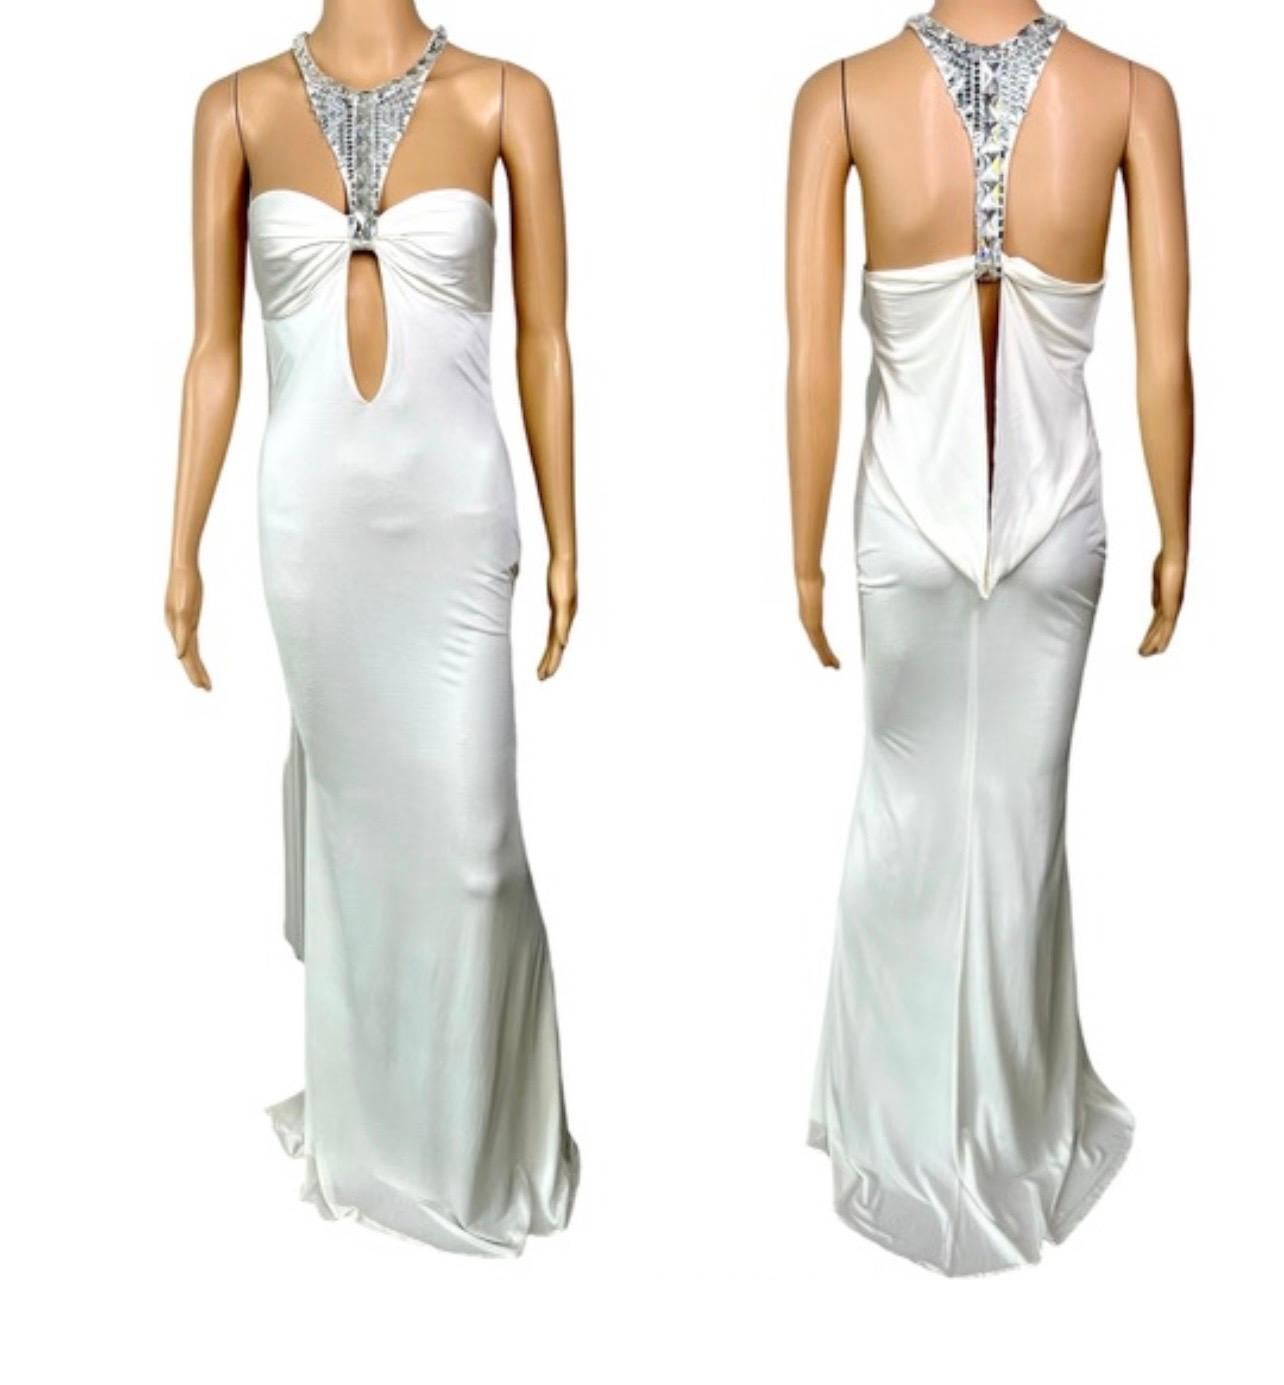 Tom Ford for Gucci F/W 2004 Embellished Plunging Cutout Ivory Evening Dress Gown IT 44

Gucci ivory evening dress featuring embellished accents at neckline and cutouts at front and back. 

